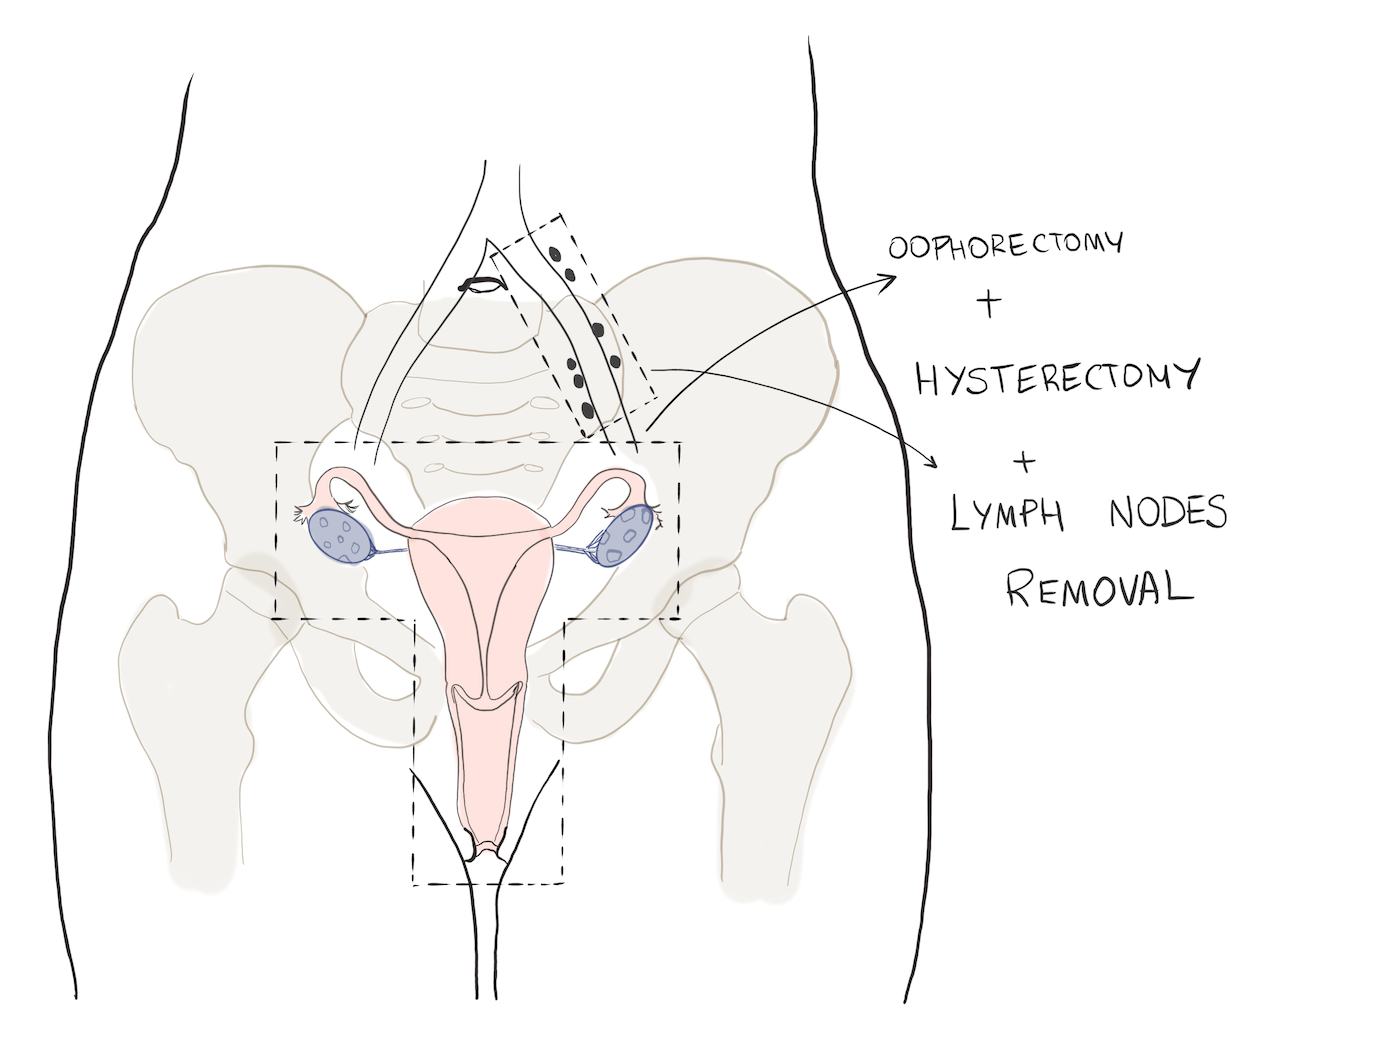 Oophorectomy and hysterectomy and lymph node resection